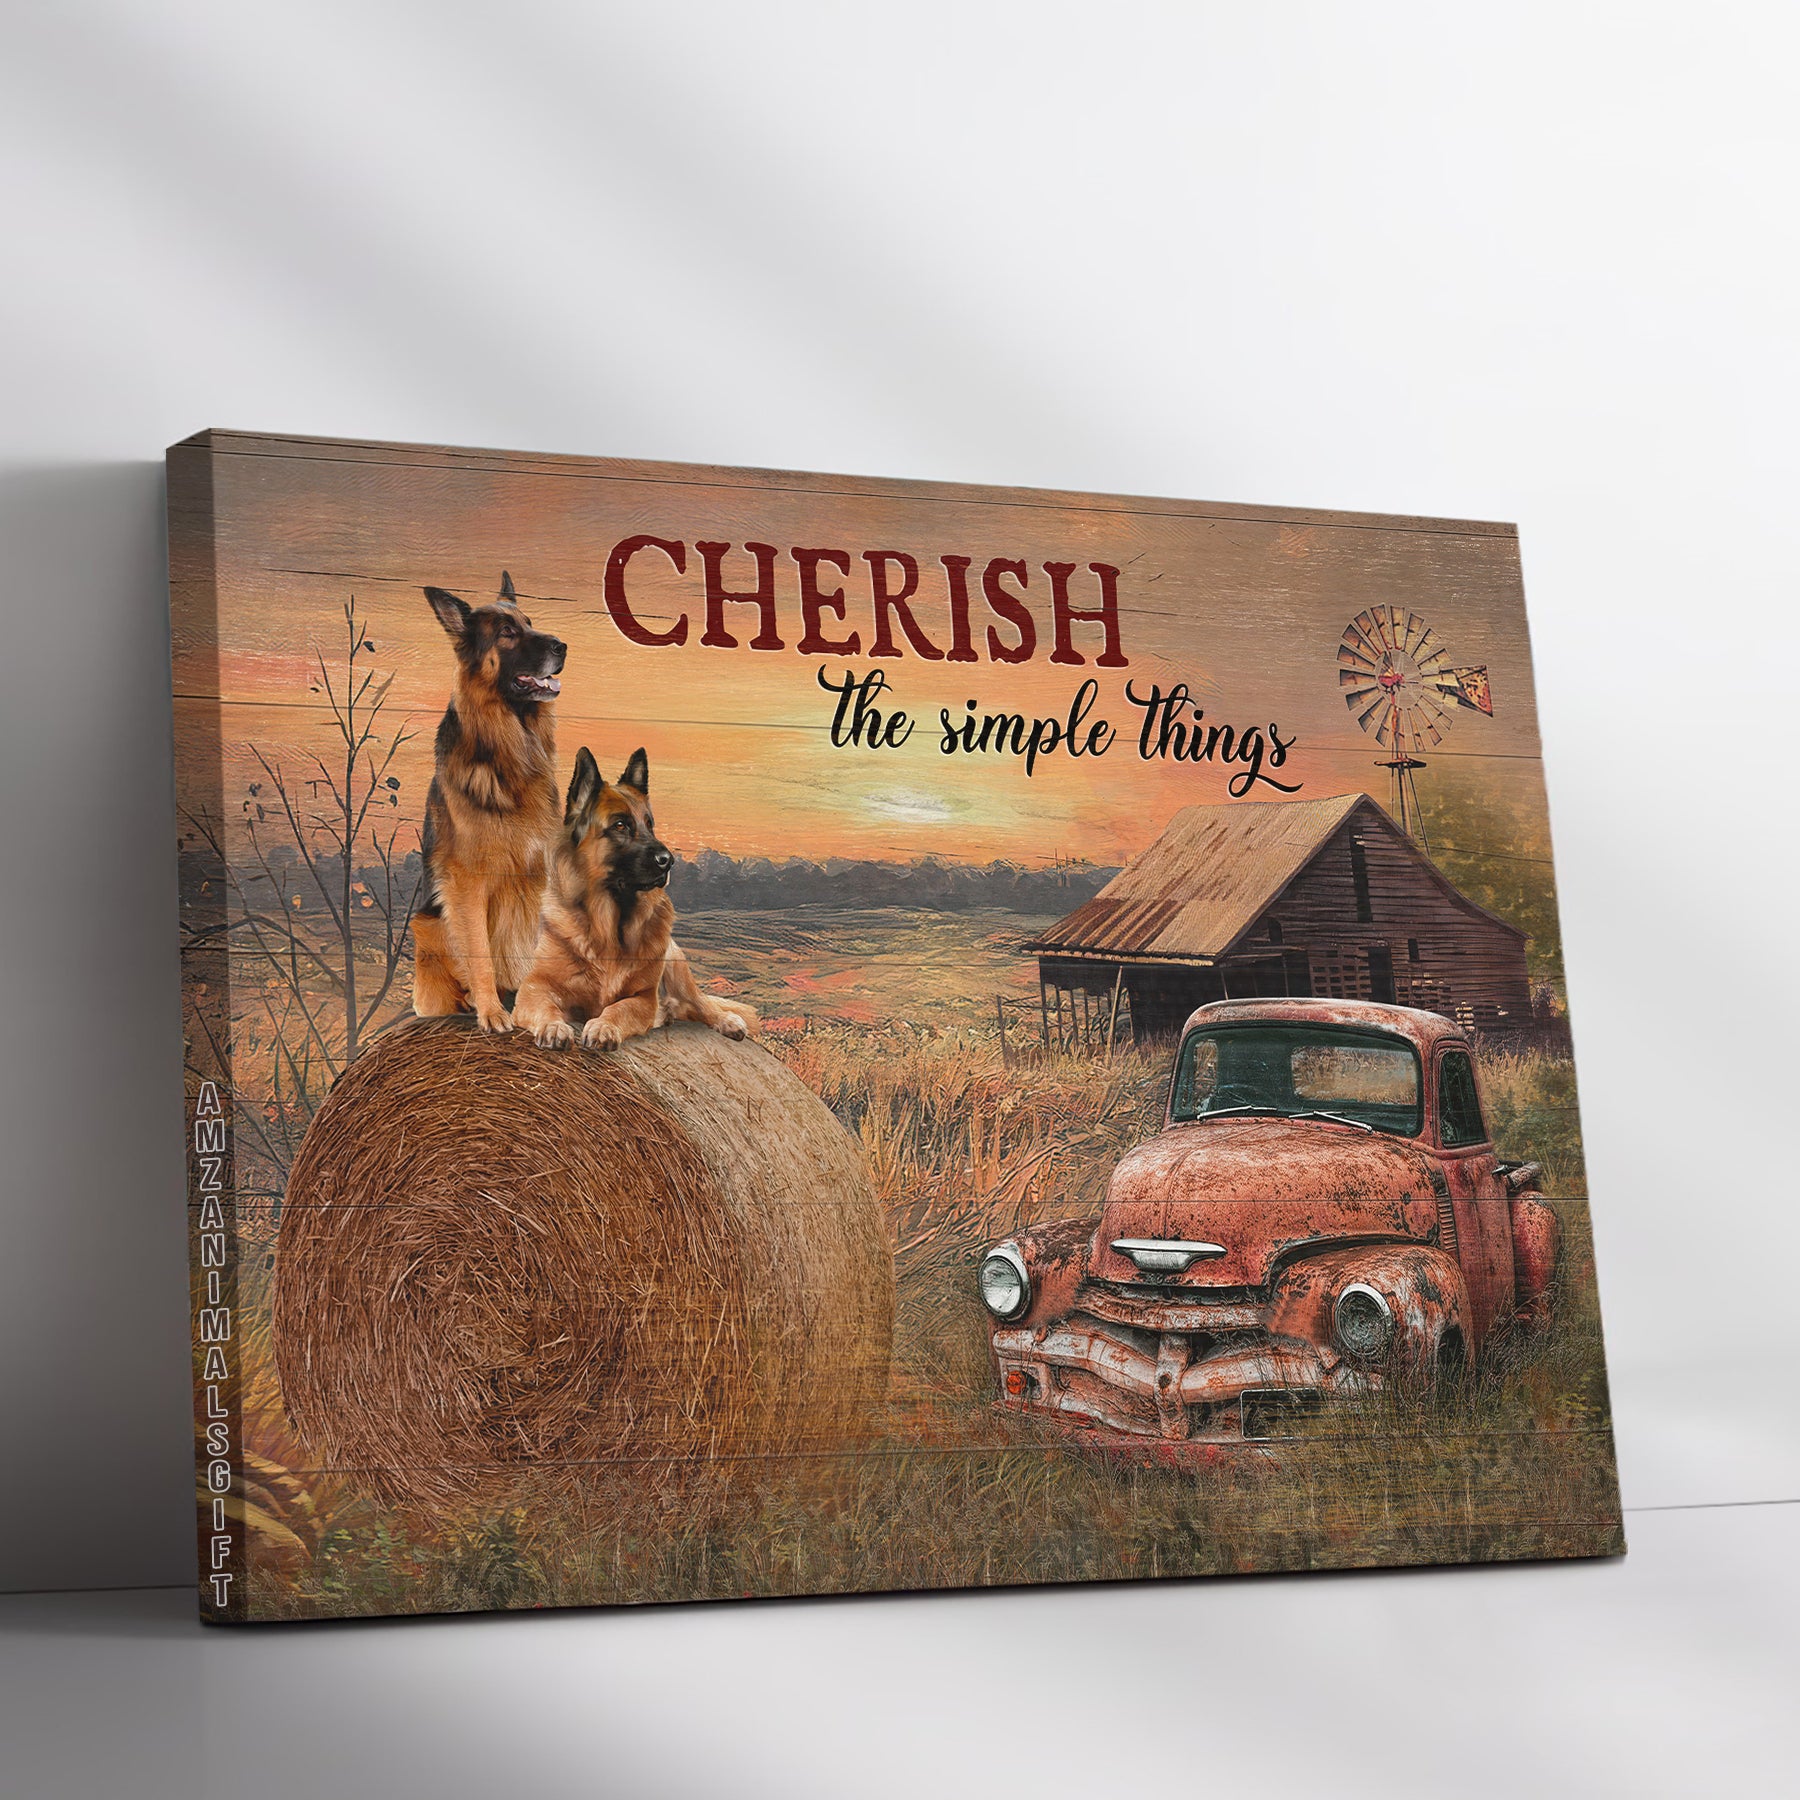 German Shepherd Premium Wrapped Landscape Canvas - German Shepherd, Red Old Car, Farm Painting, Cherish The Simple Thing- Gift For Dog Lovers